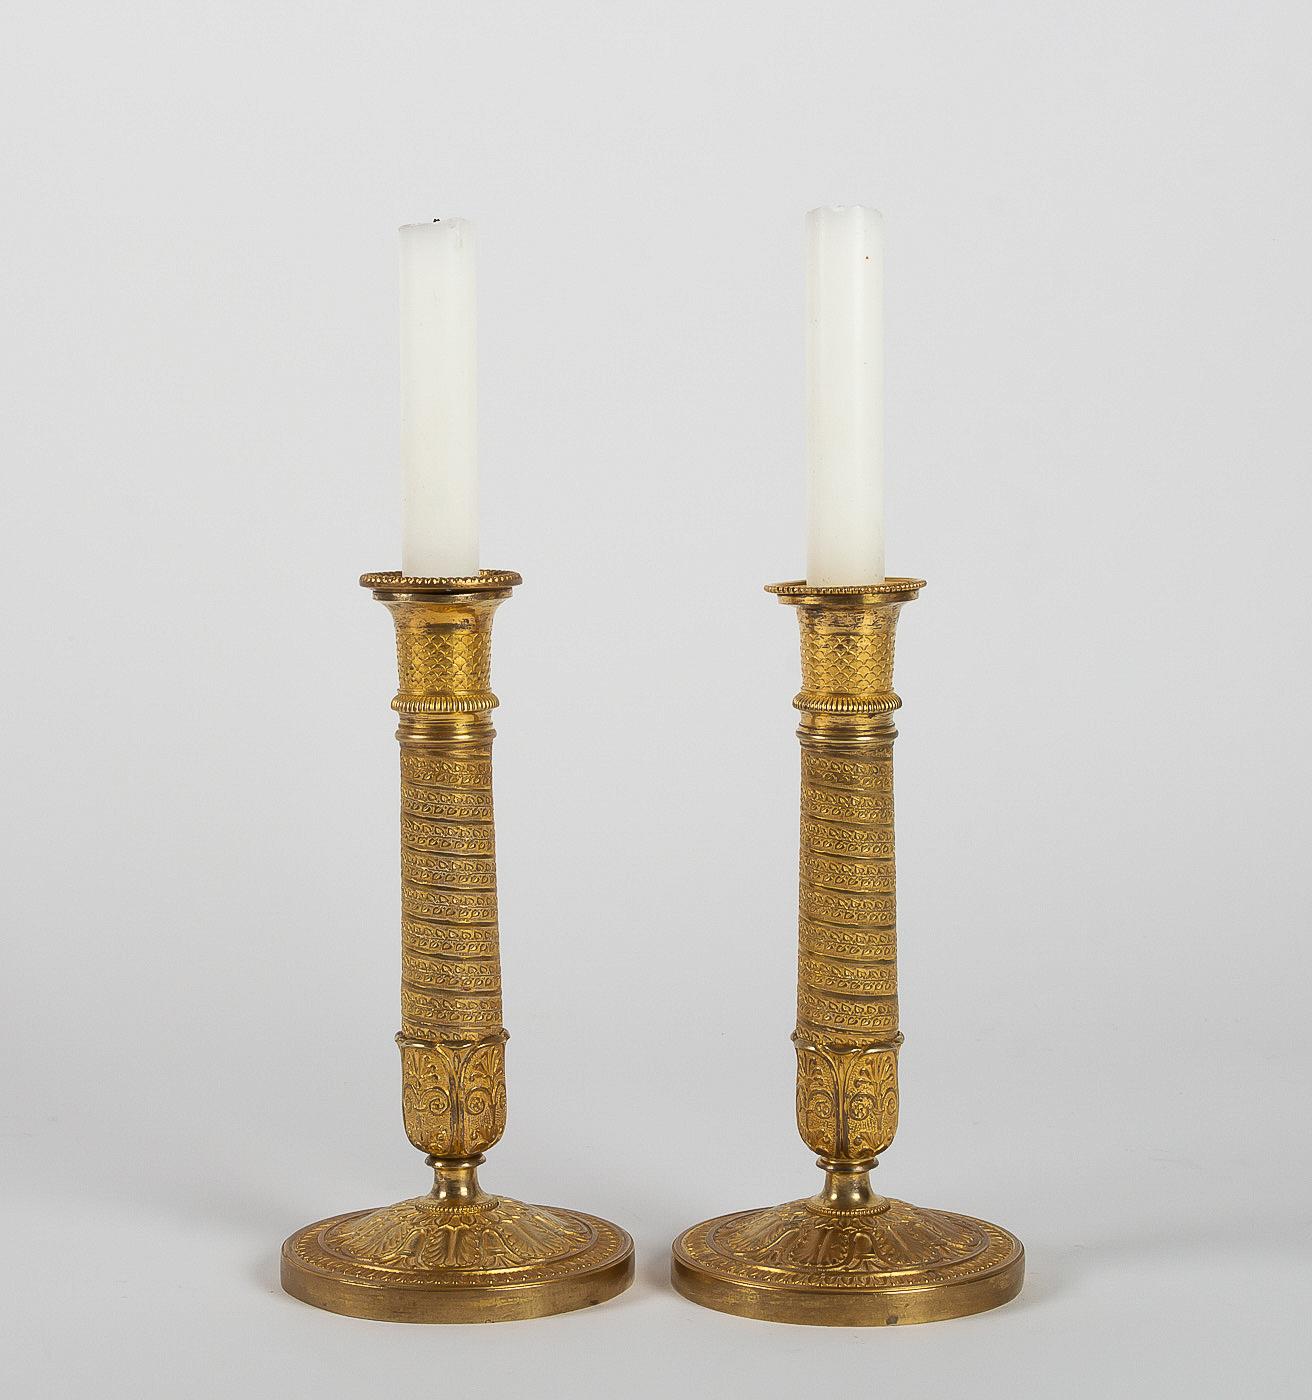 French Empire Period, Pair of Small Chiseled Gilt-Bronze Candlesticks Circa 1805 6